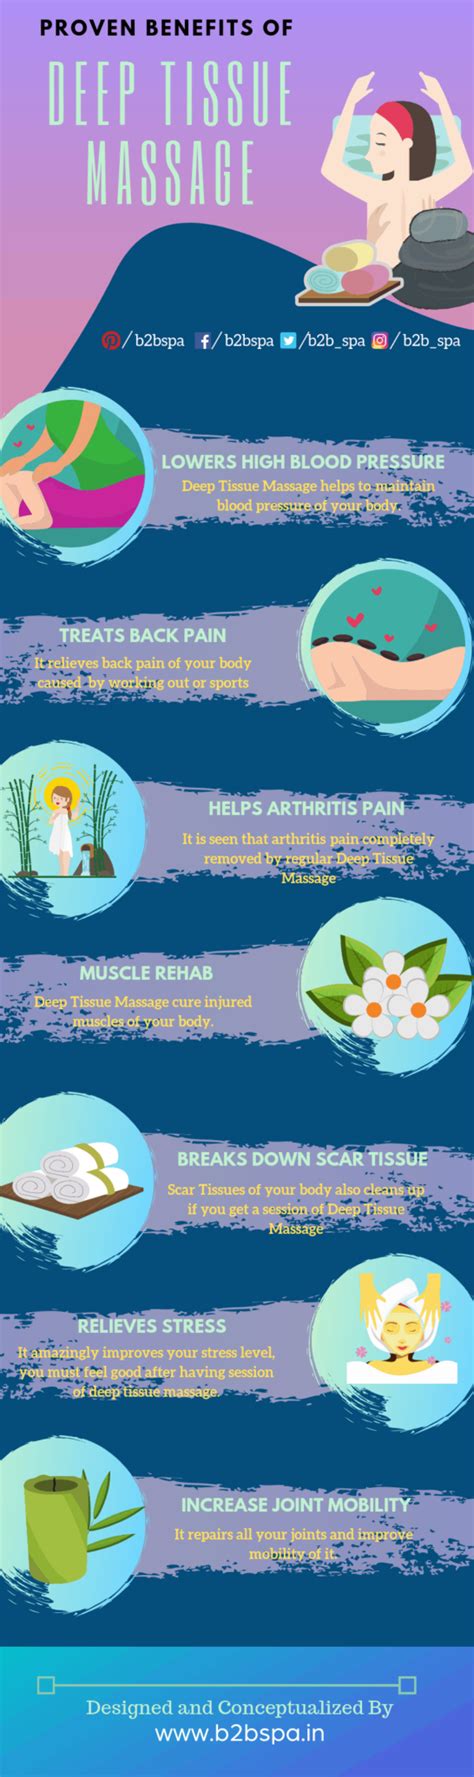 7 Reasons Why Deep Tissue Massage Can Work Wonders Infographic